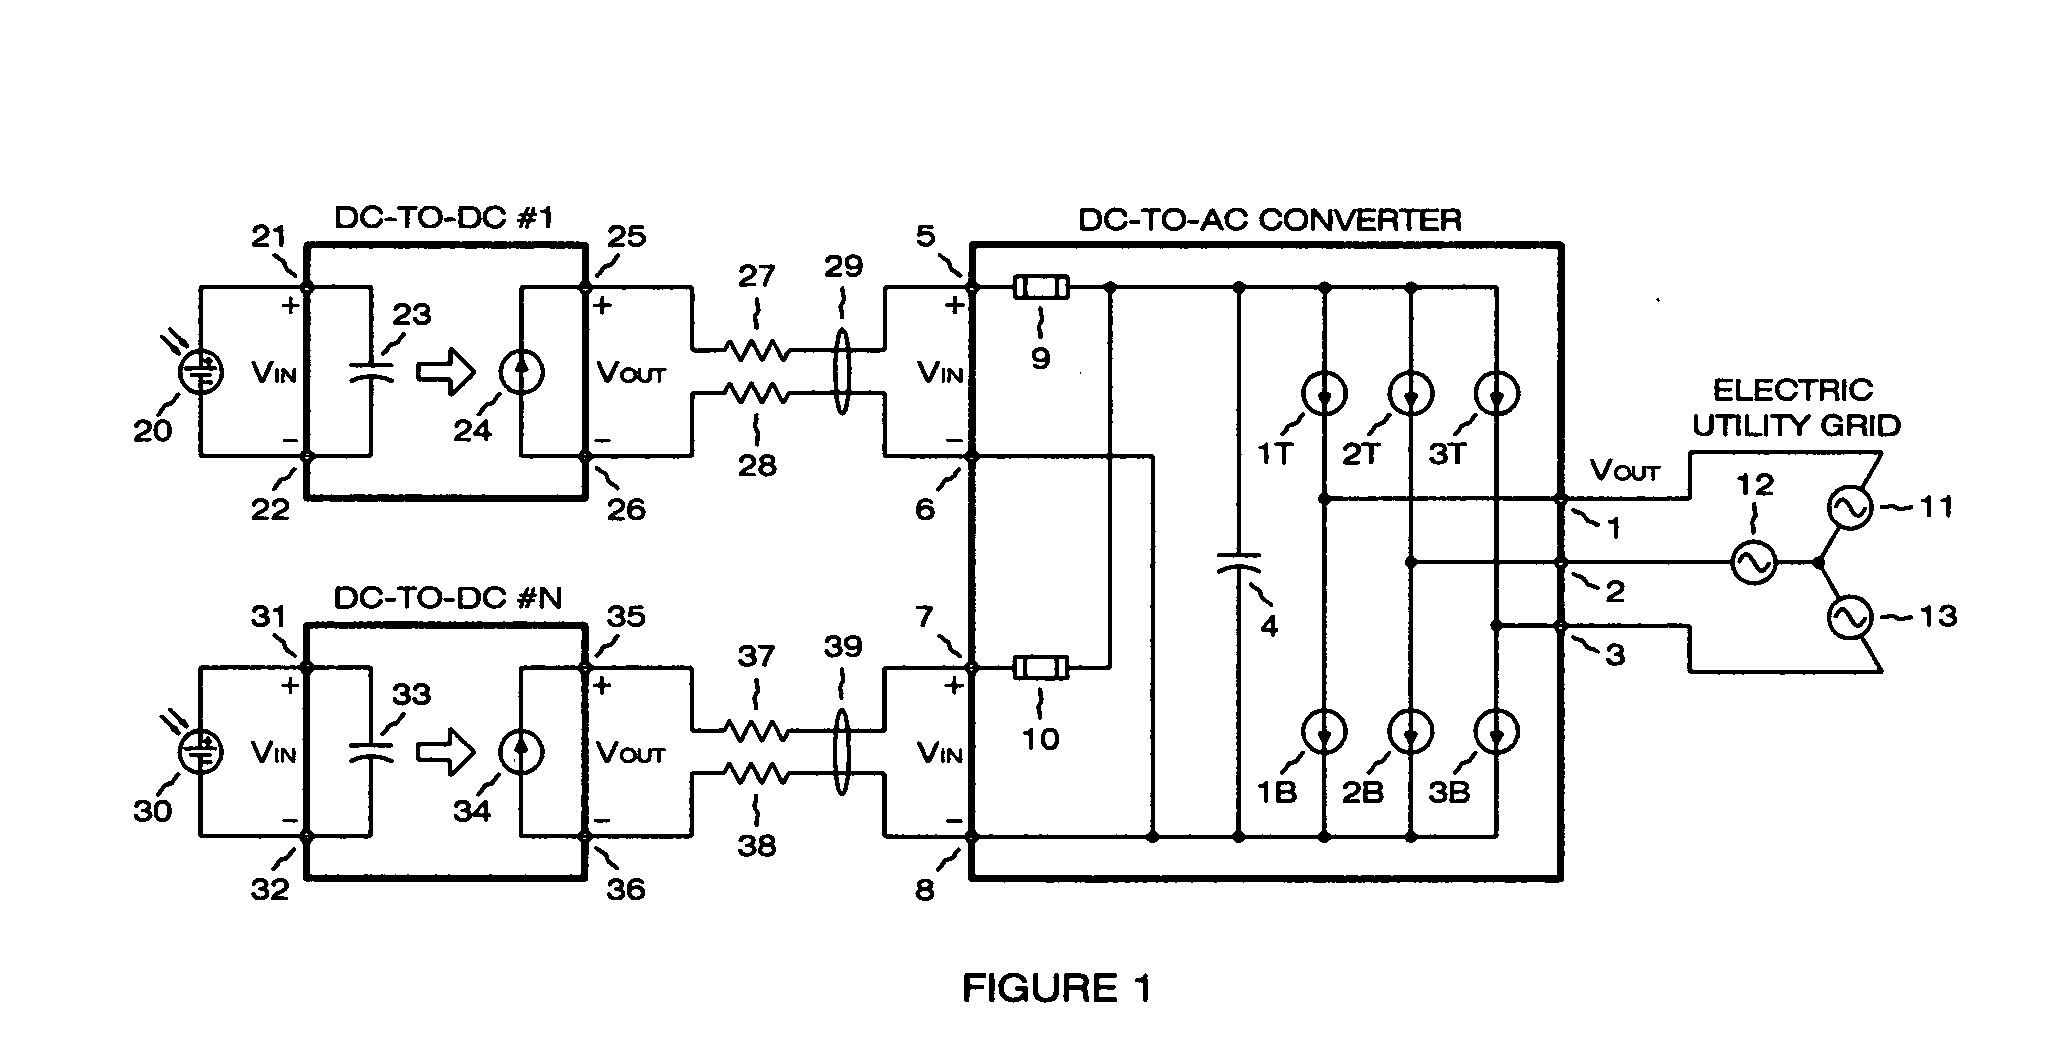 Photovoltaic power plant with distributed DC-to-DC power converters